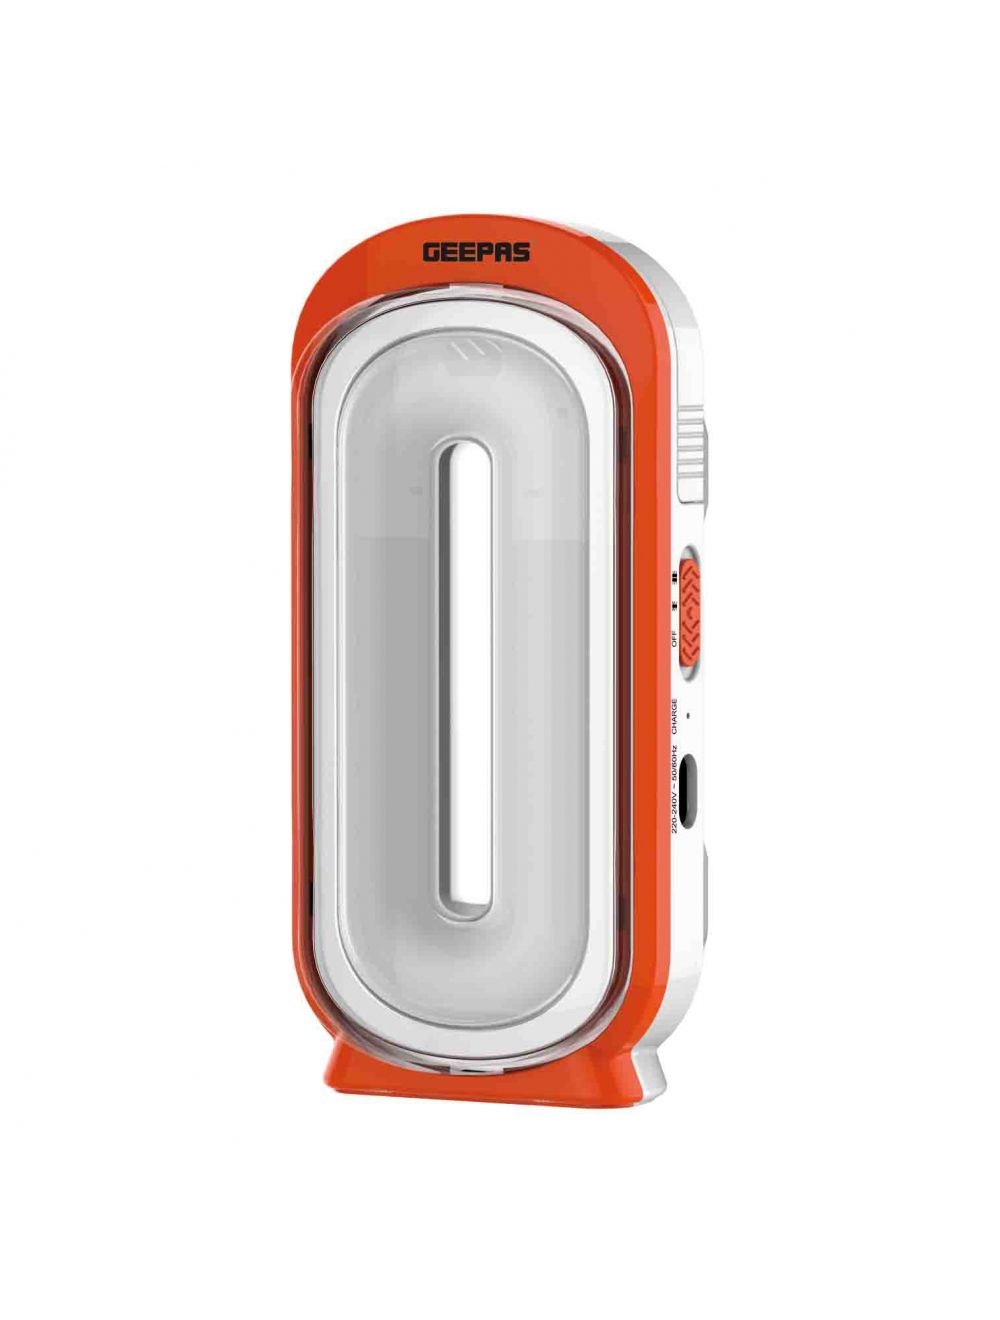 Geepas GE5599 40 LED Rechargeable Emergency Lantern with 0.5 Watts